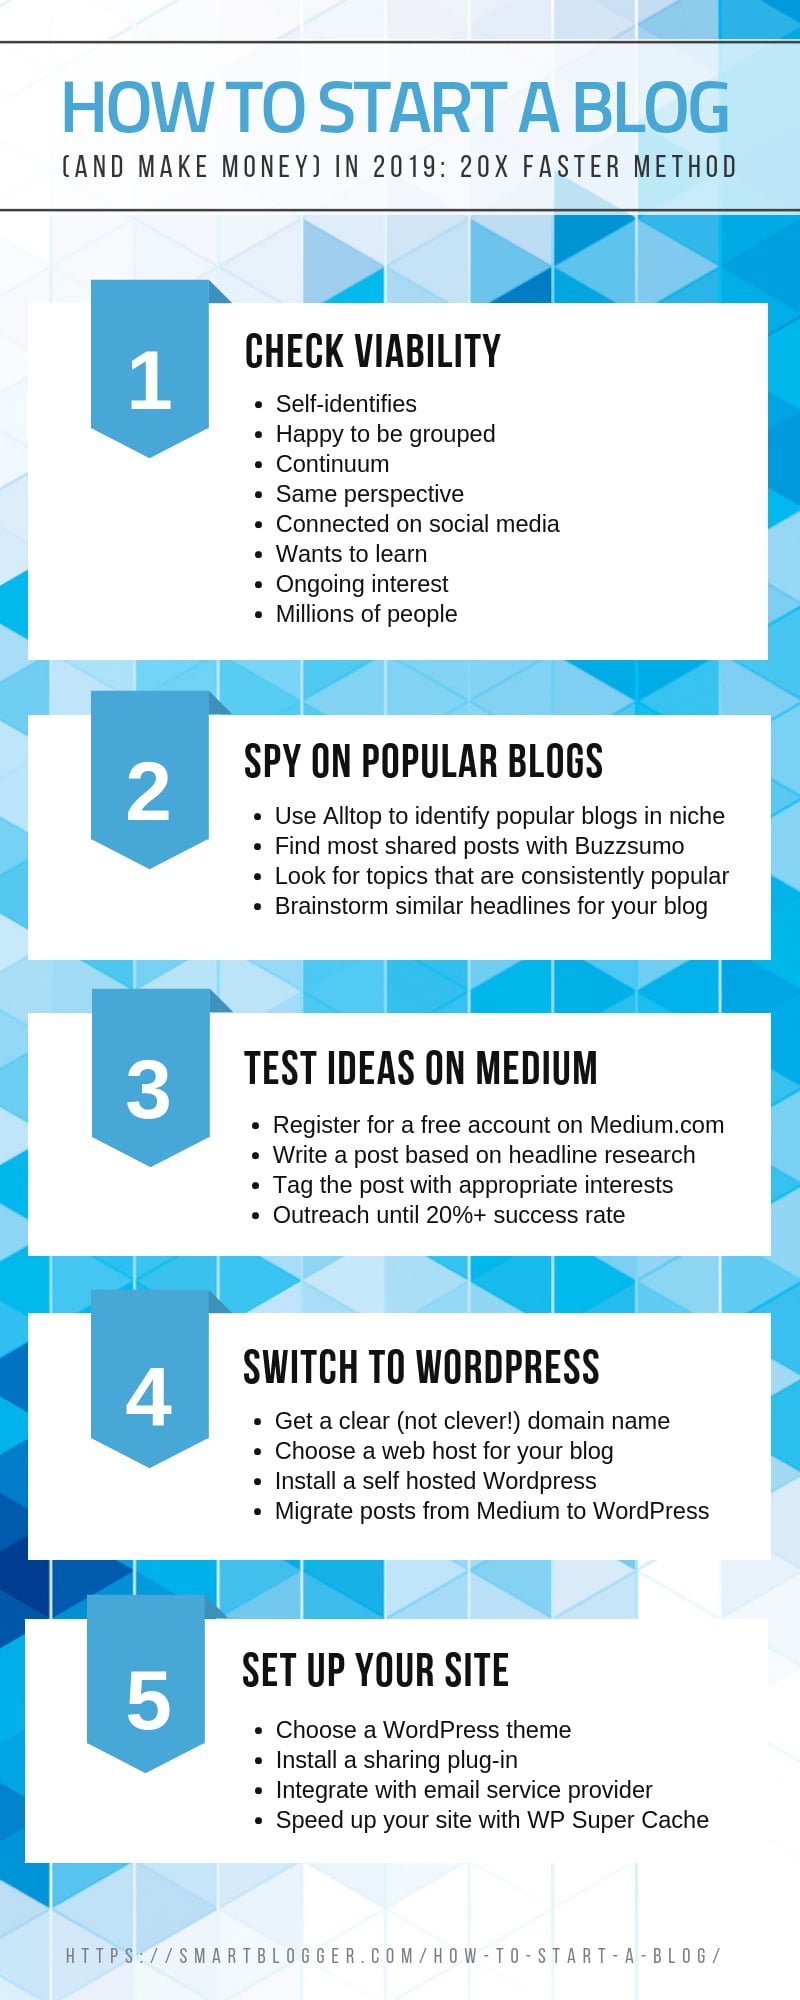 How to Start a Blog in 2019: Research Reveals 20X Faster Method